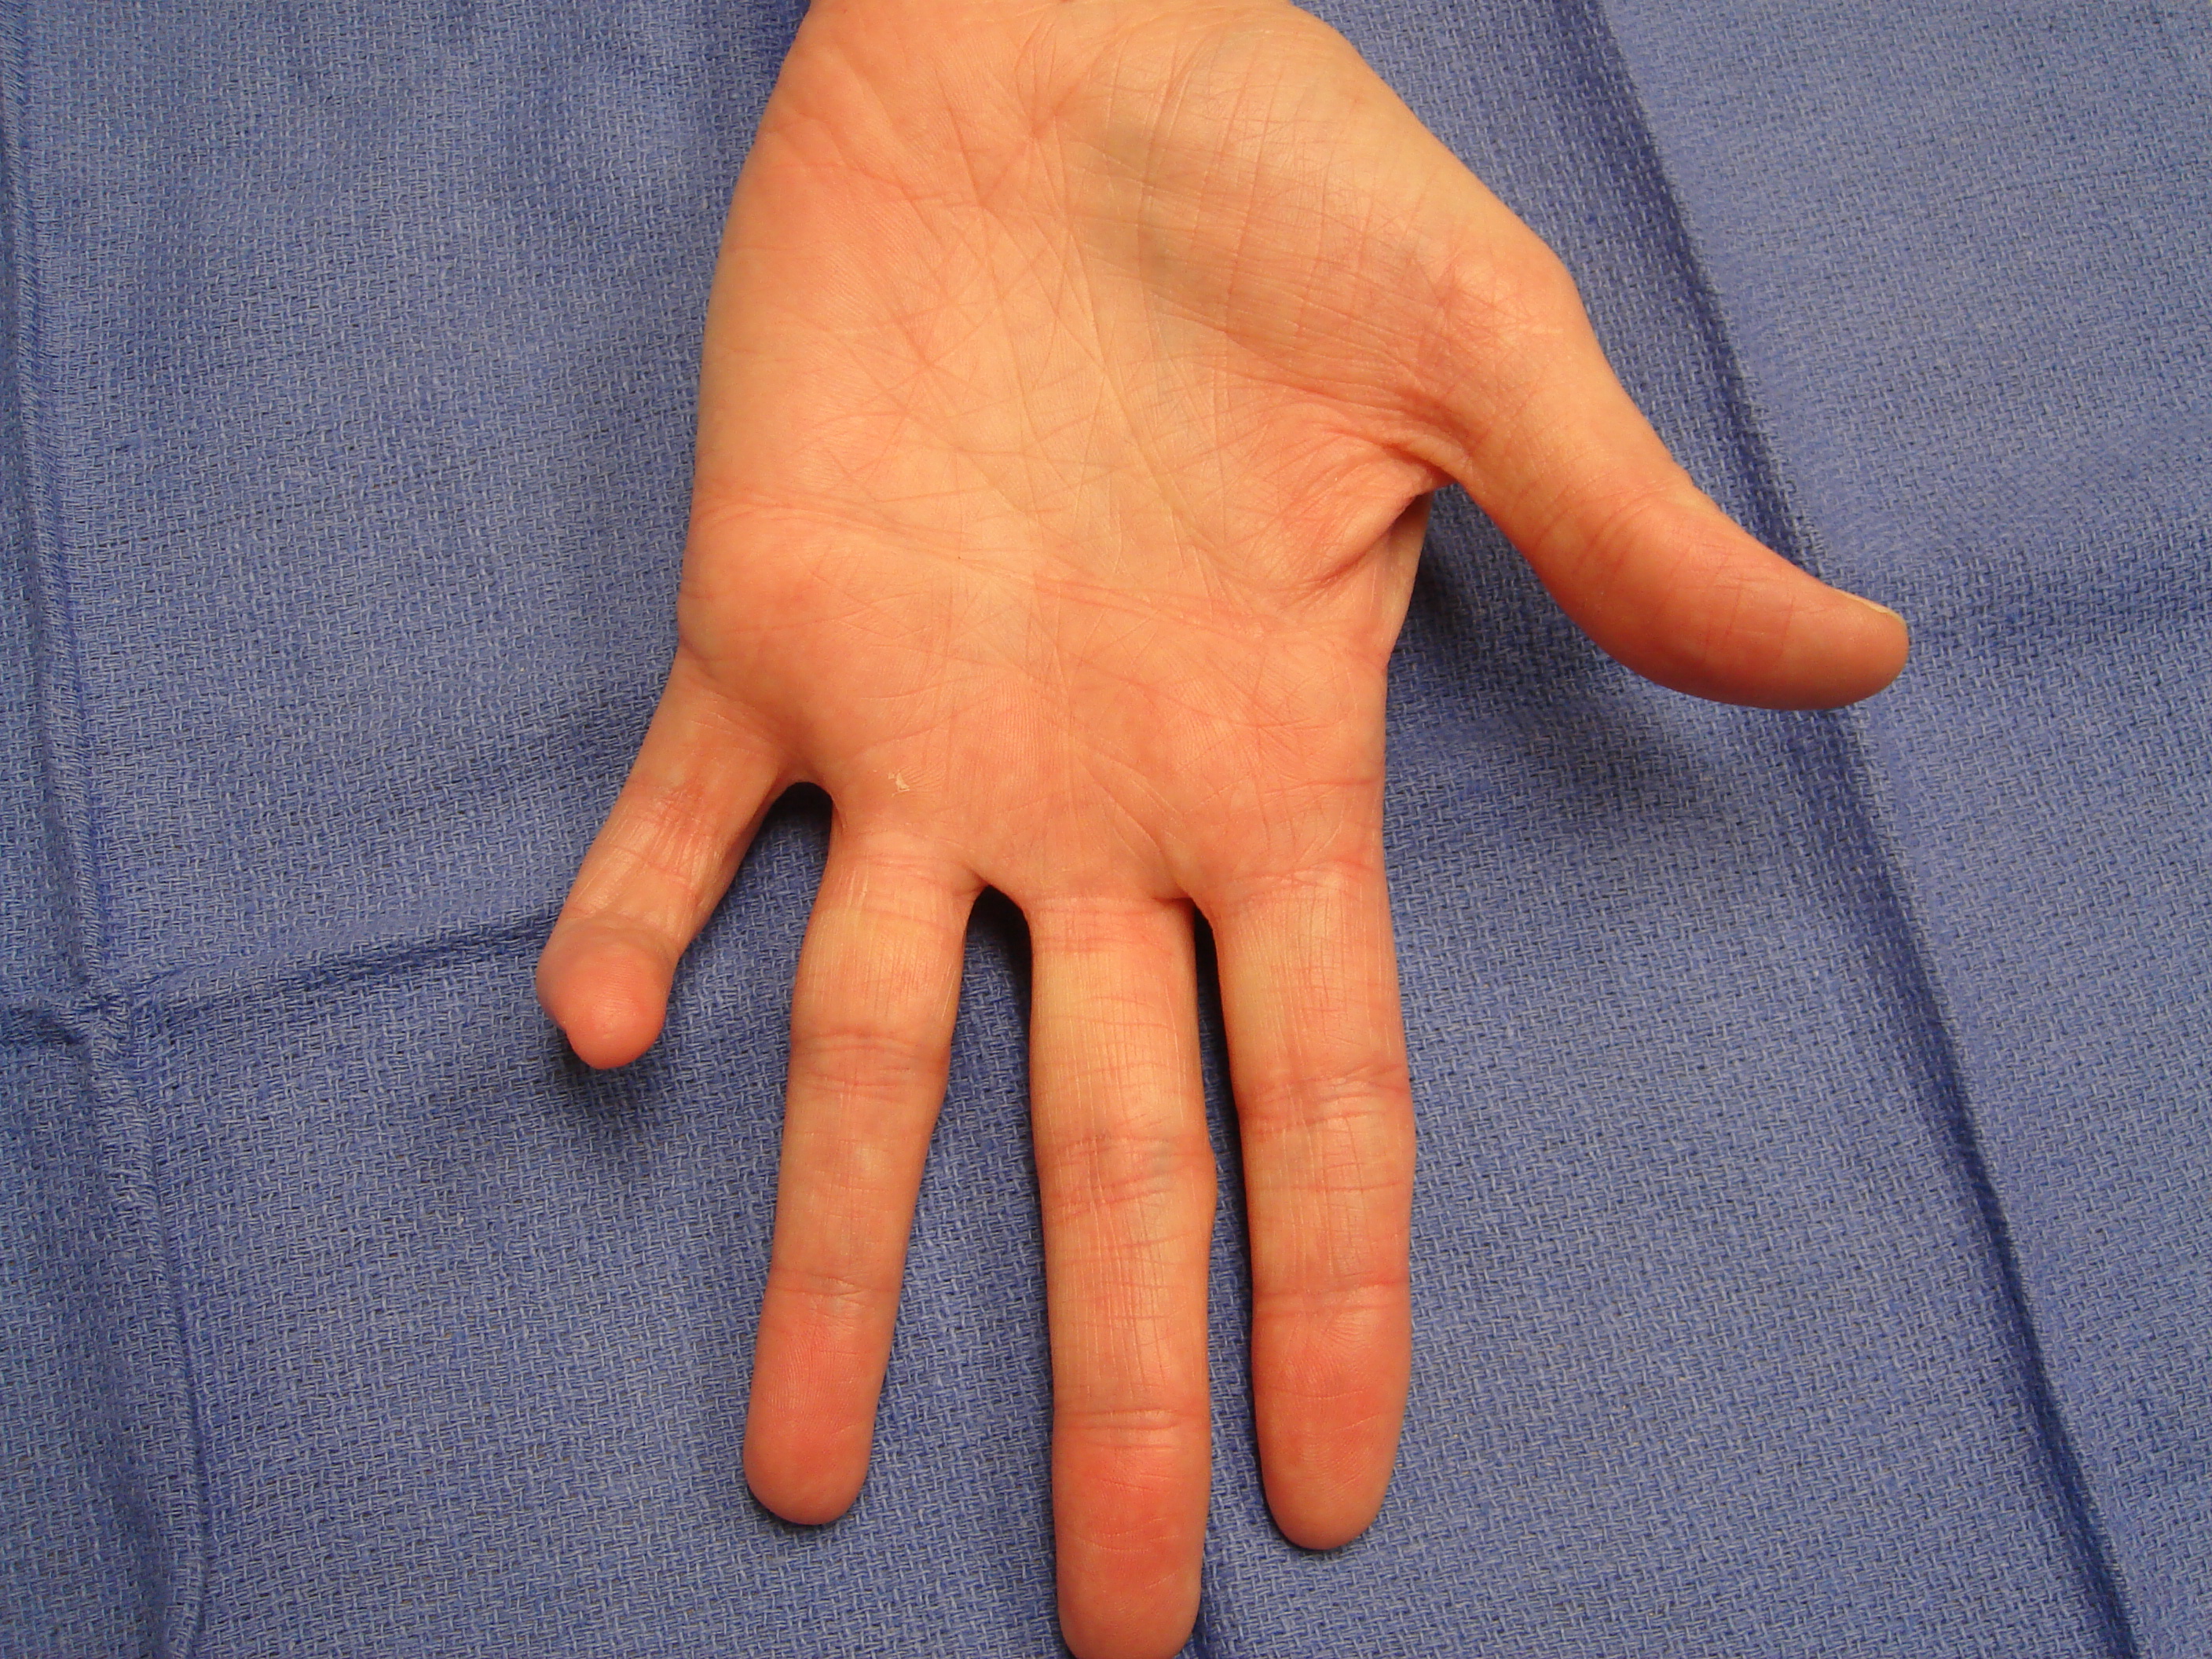 Figure 8b: These images show a woman in her mid-50s with a significant, little-finger, combined (contiguous cord) PIP and DIP contracture. The MP joint was not affected. The injection and manipulation videos depict custom adaptation of the “safe technique” for such an unusual cases.